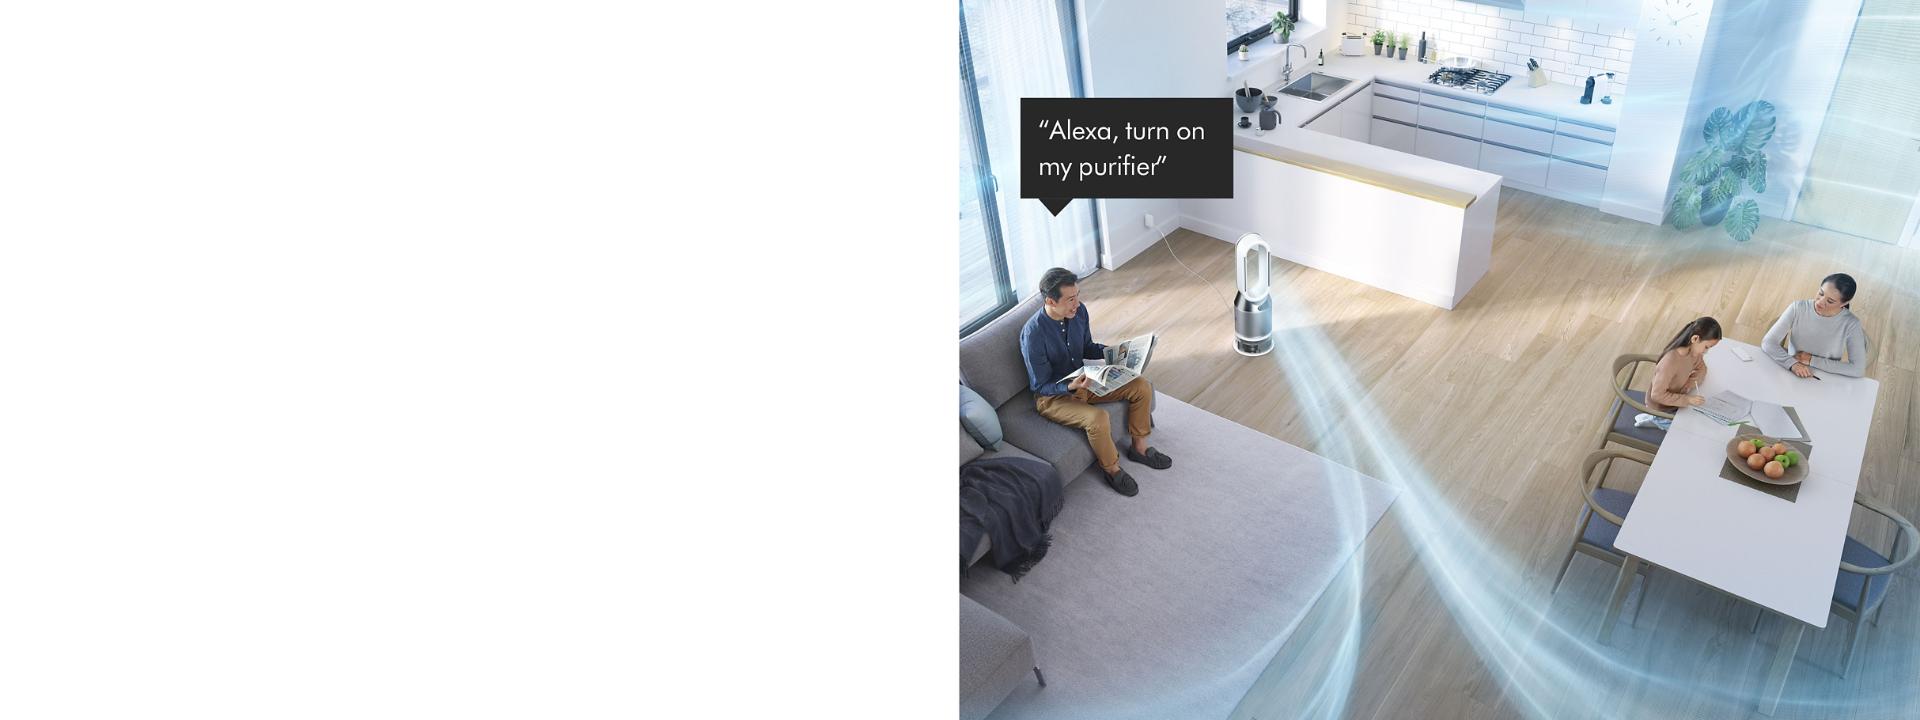 Man on a sofa asking Dyson purifier to purify a room.